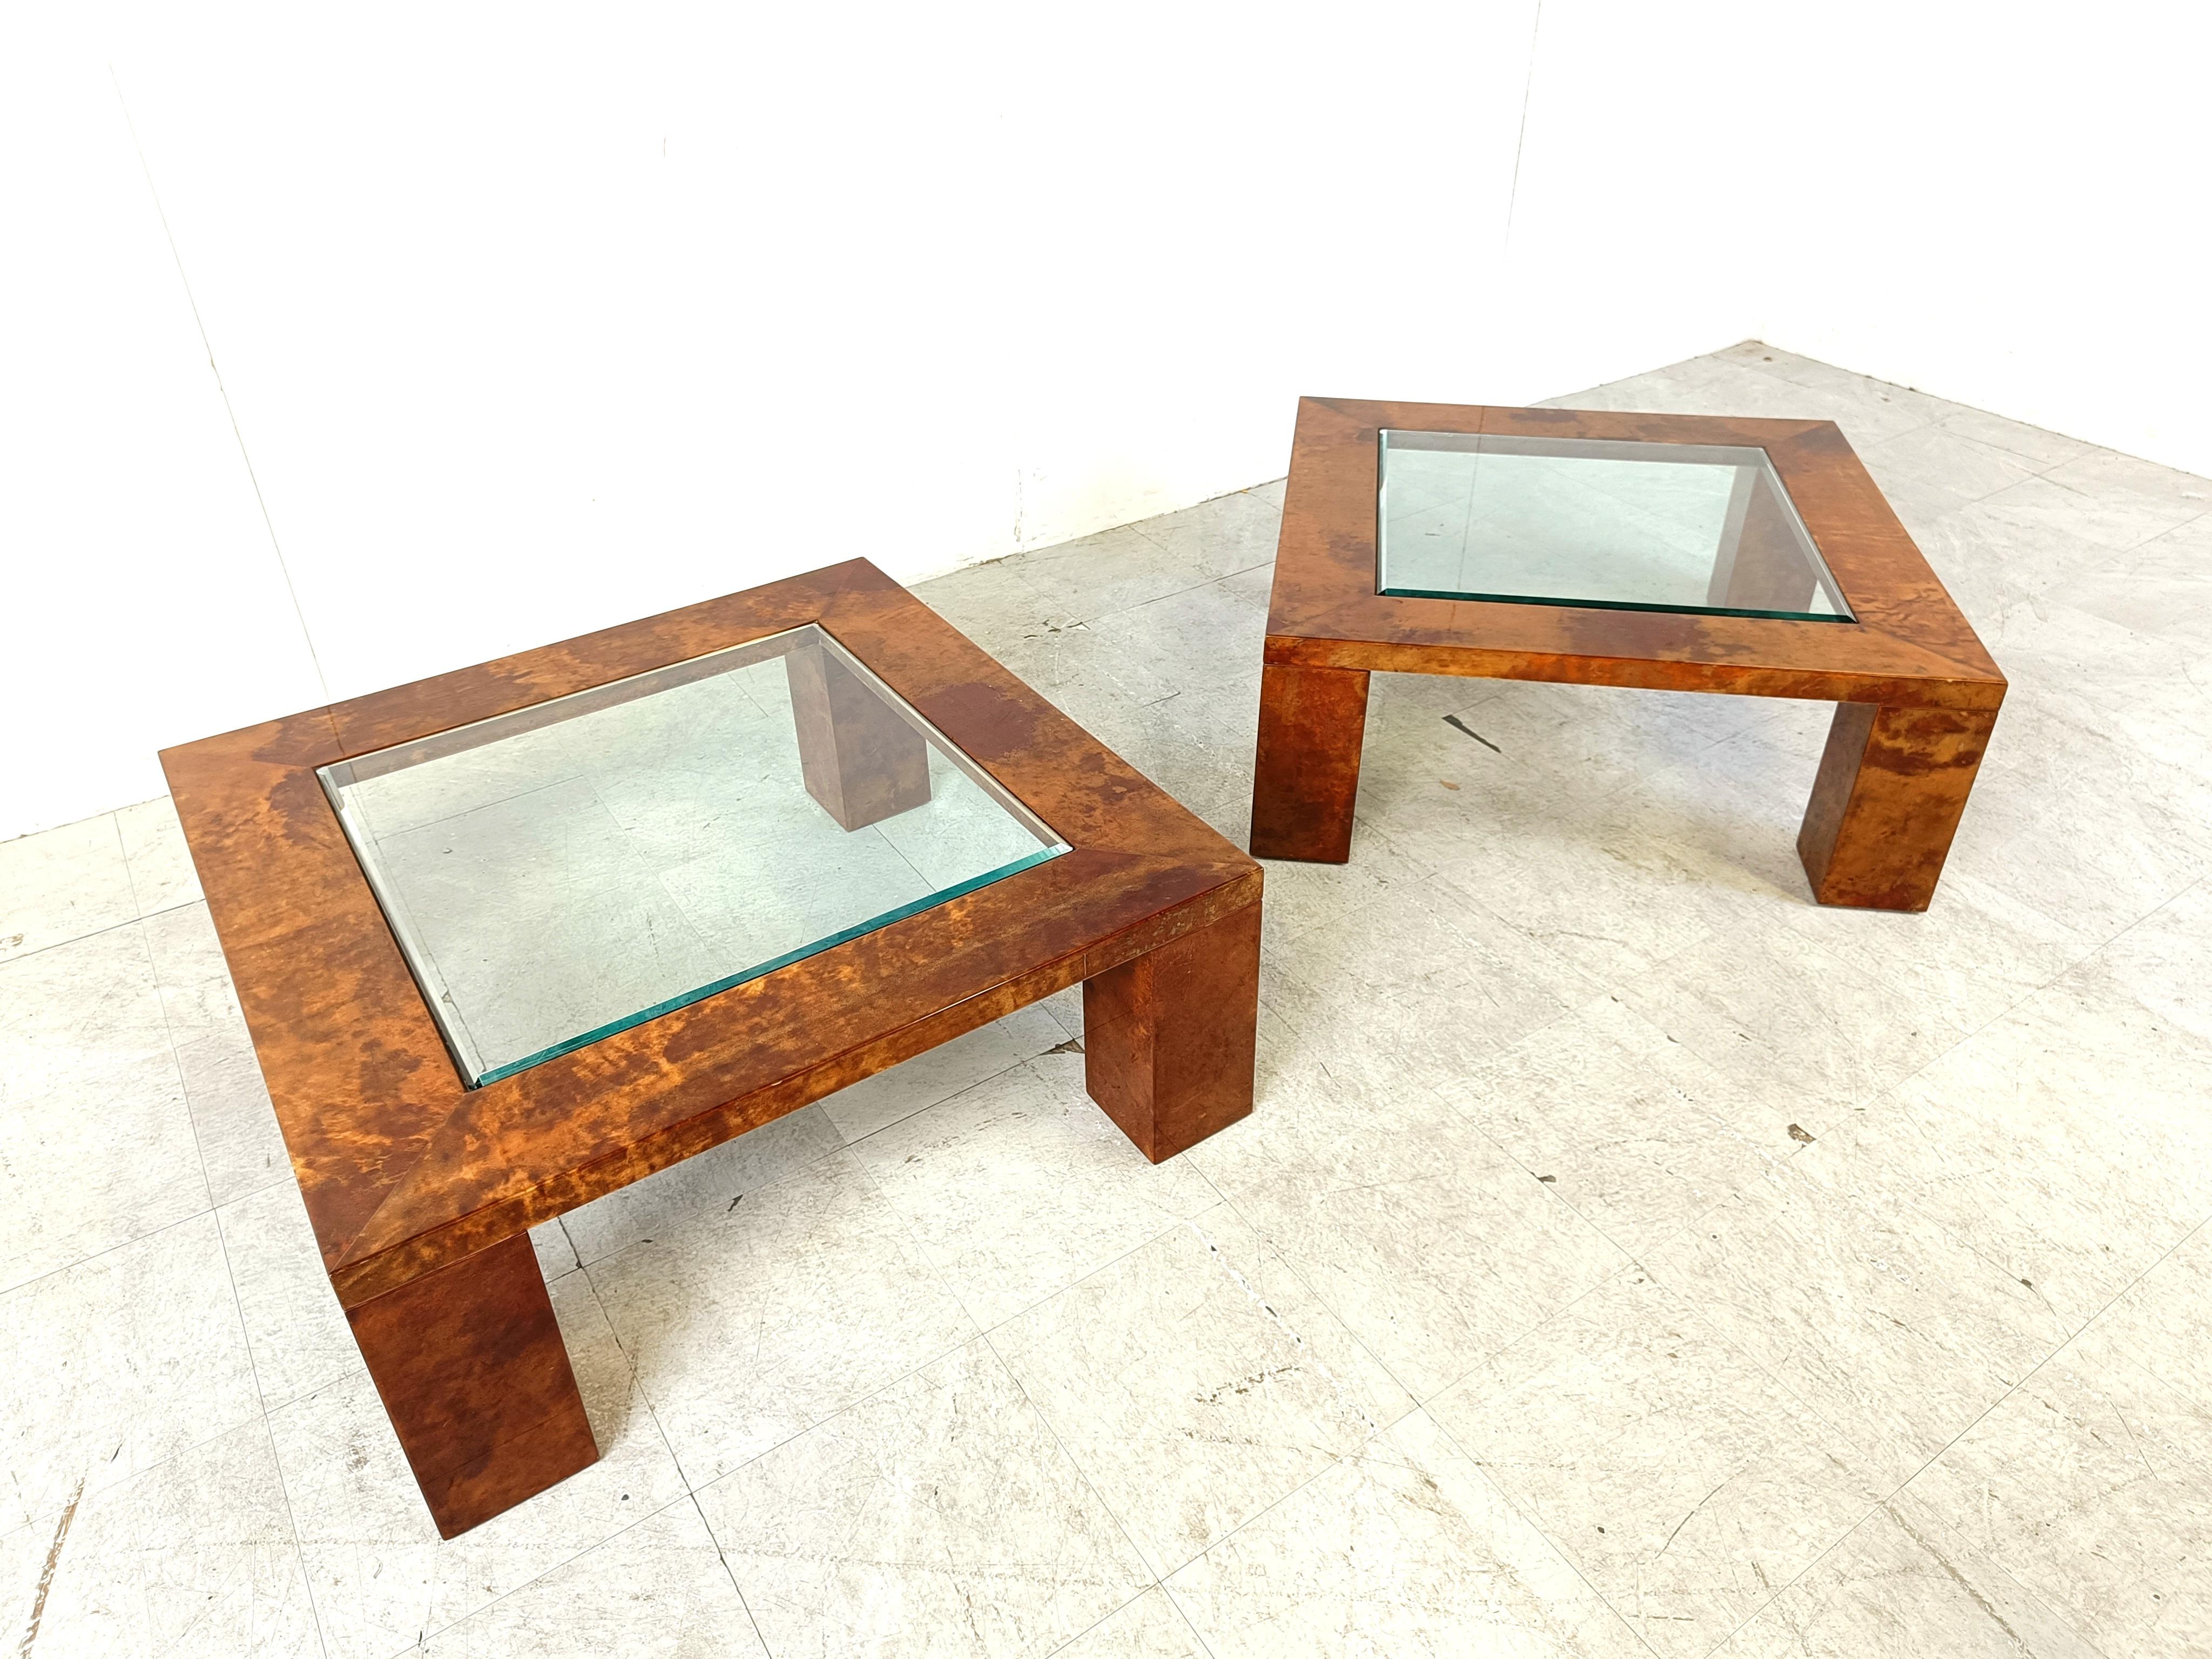 Aldo Tura Lacquered Goatskin Coffee Tables, 1960s - set of 2 For Sale 3